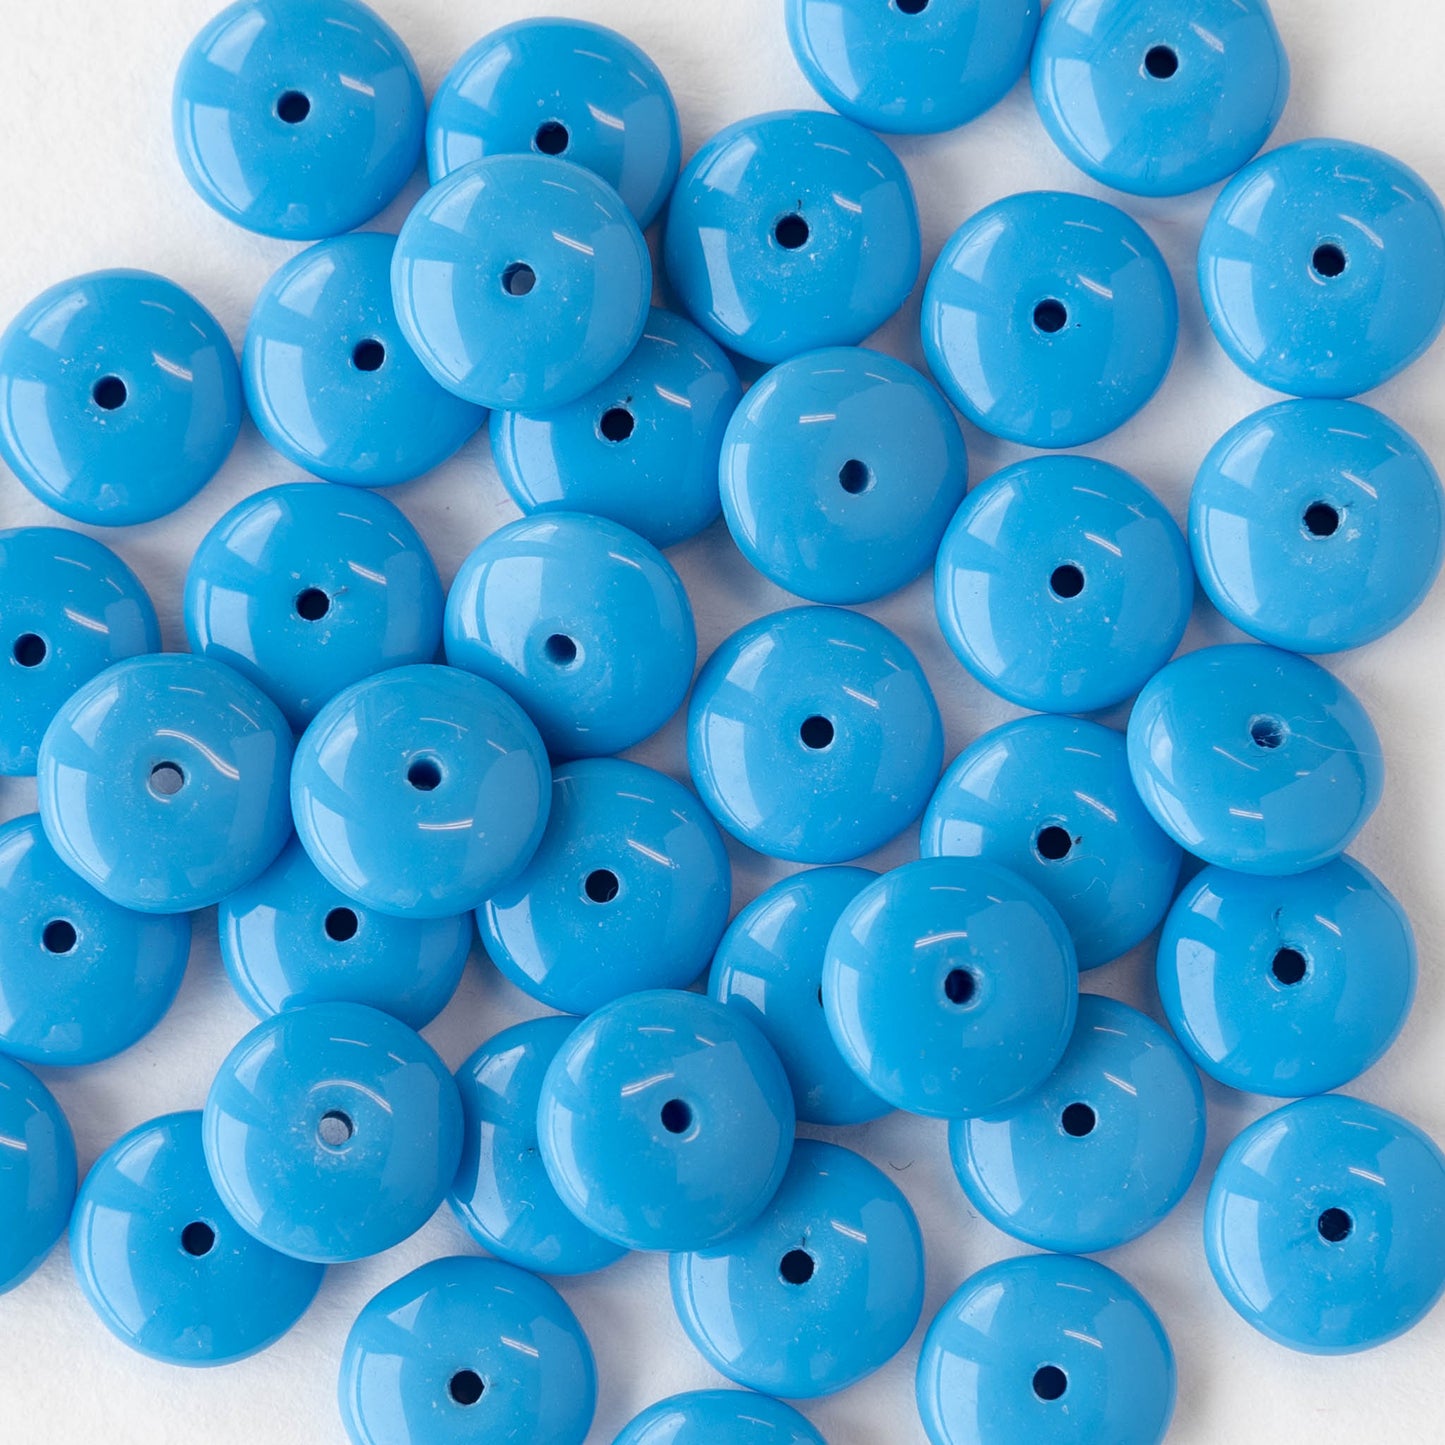 8mm Glass Rondelle Beads - Opaque Sky Blue - 30 Beads